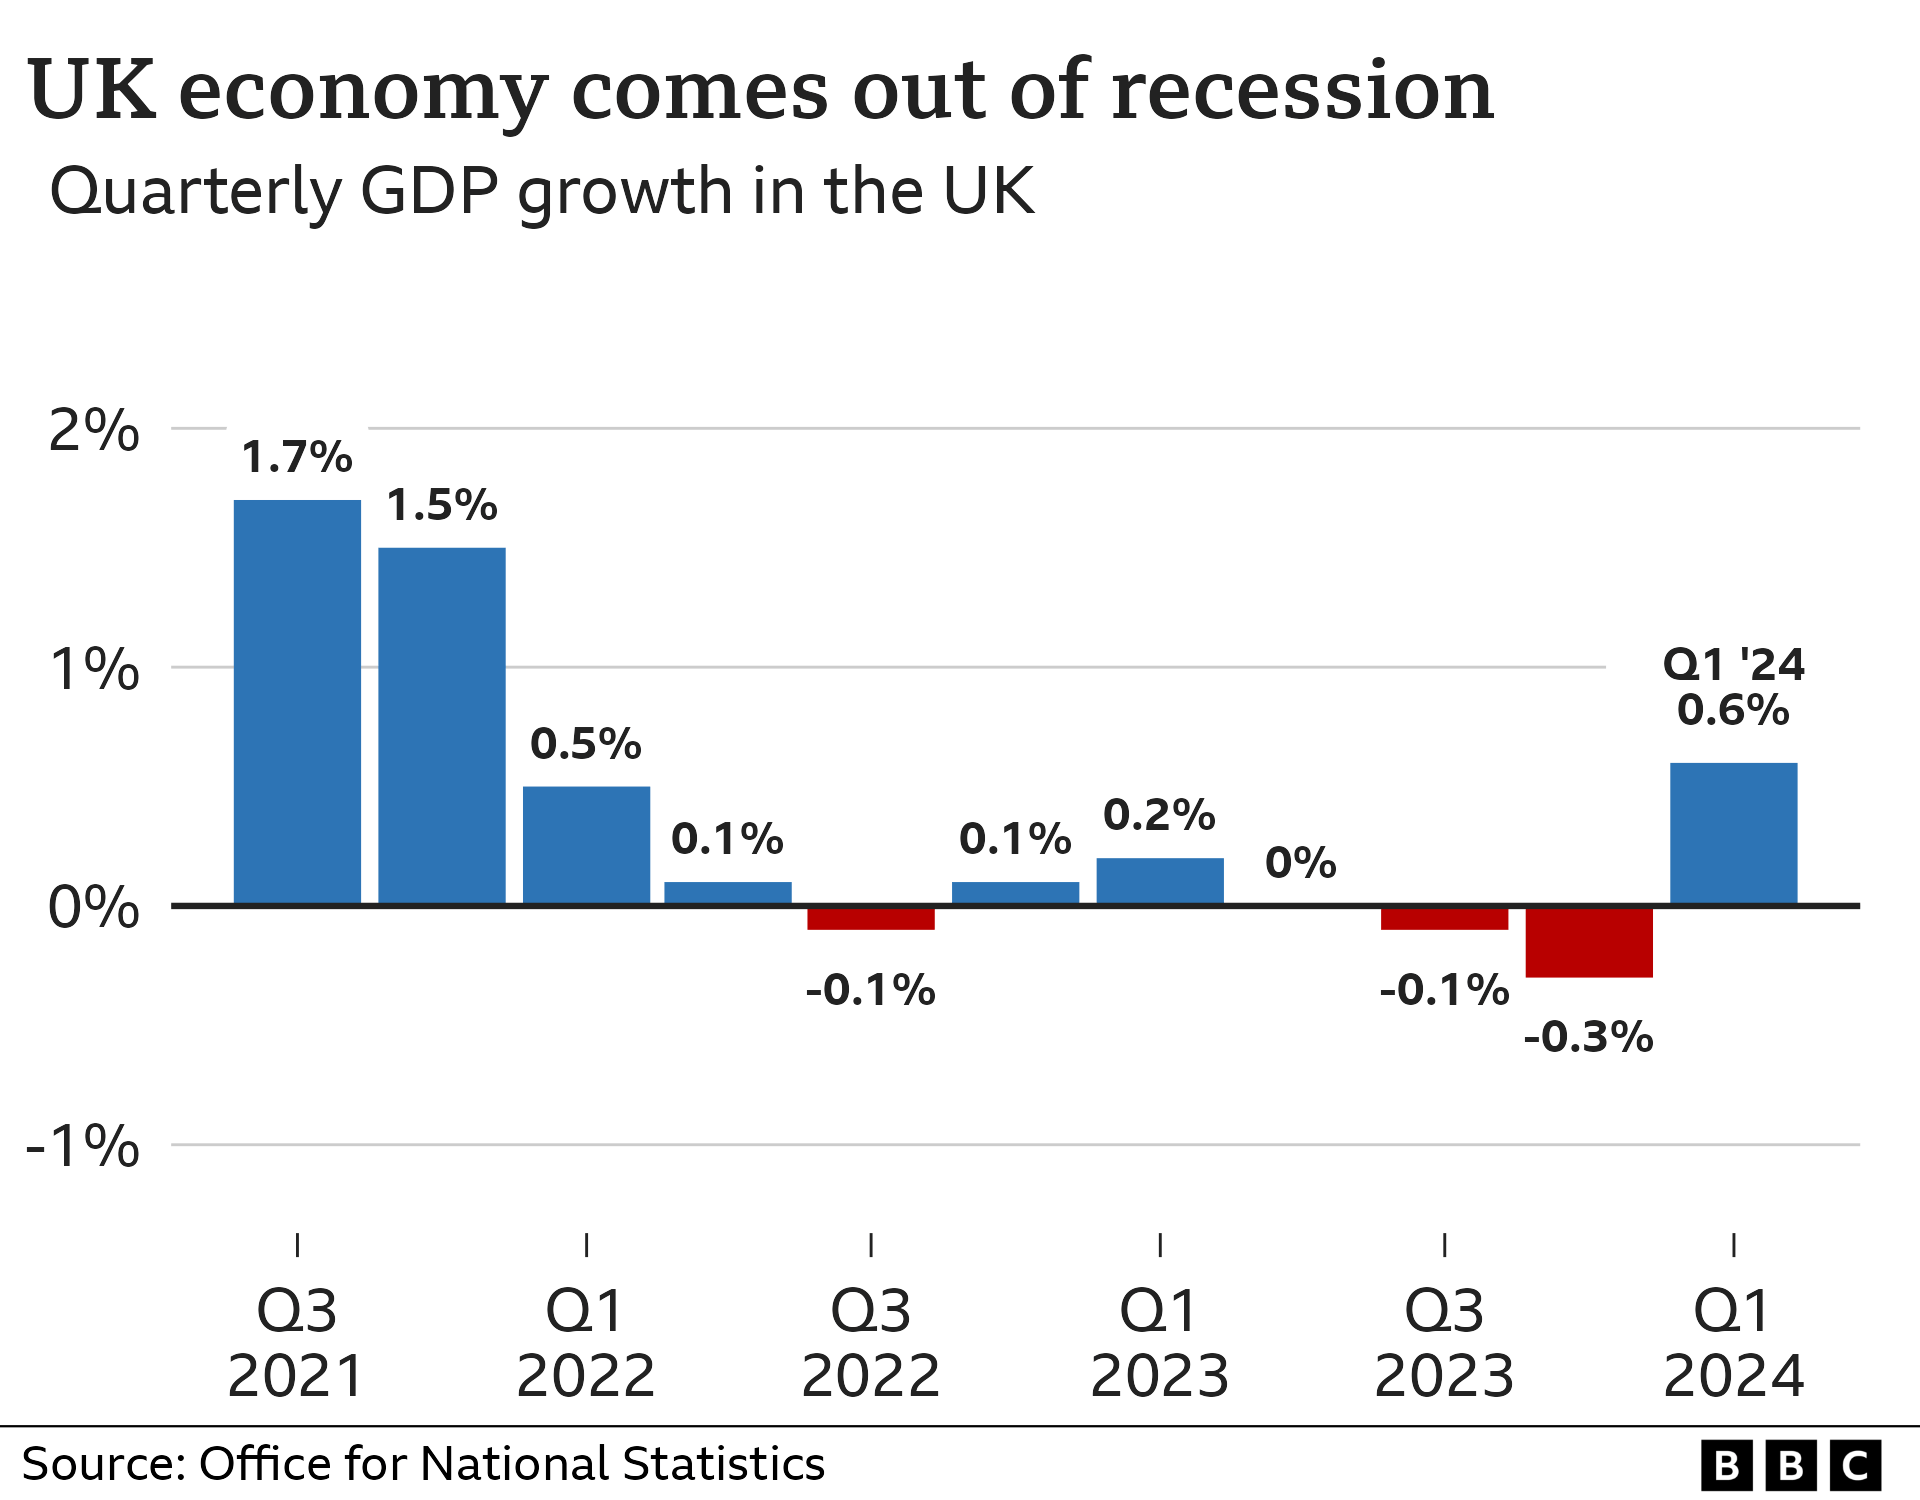 Graphic showing quarterly GDP growth